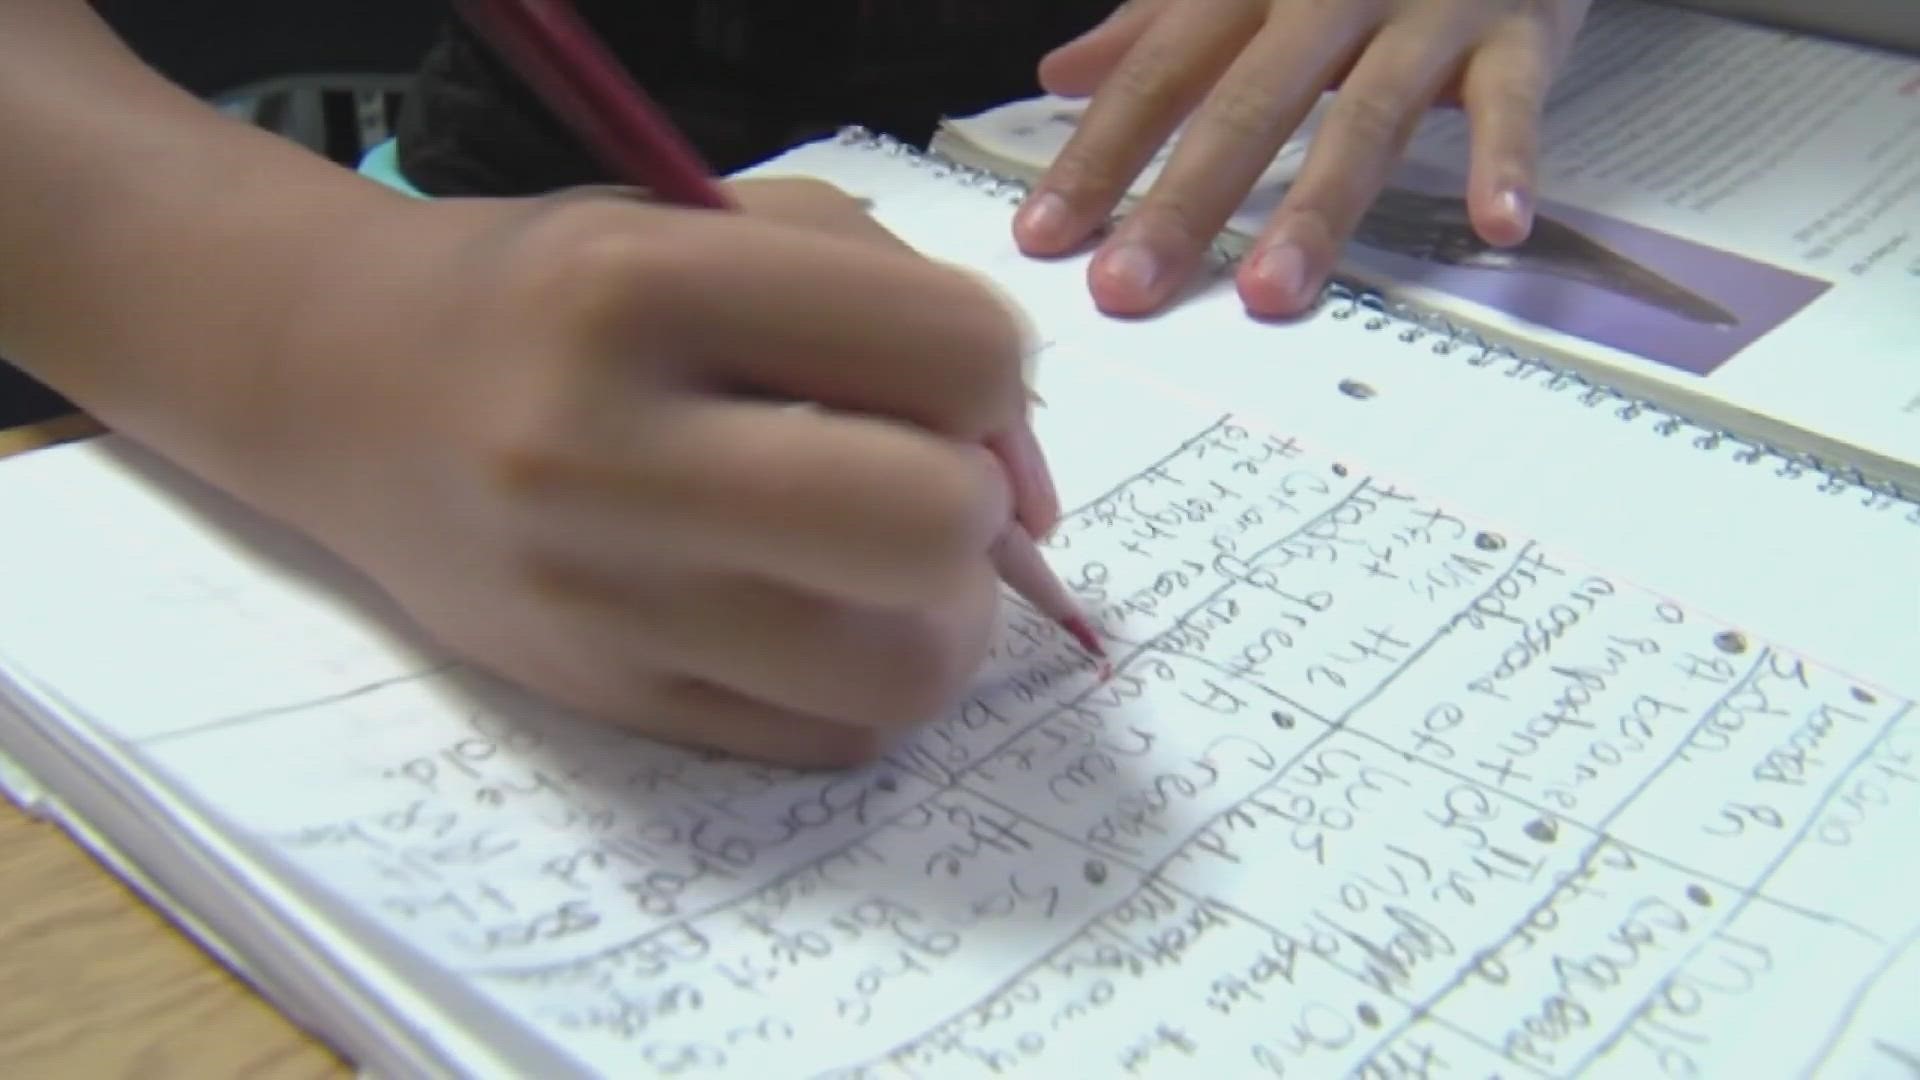 The new law could hold some third-grade students back if they don't perform well enough on a state test.